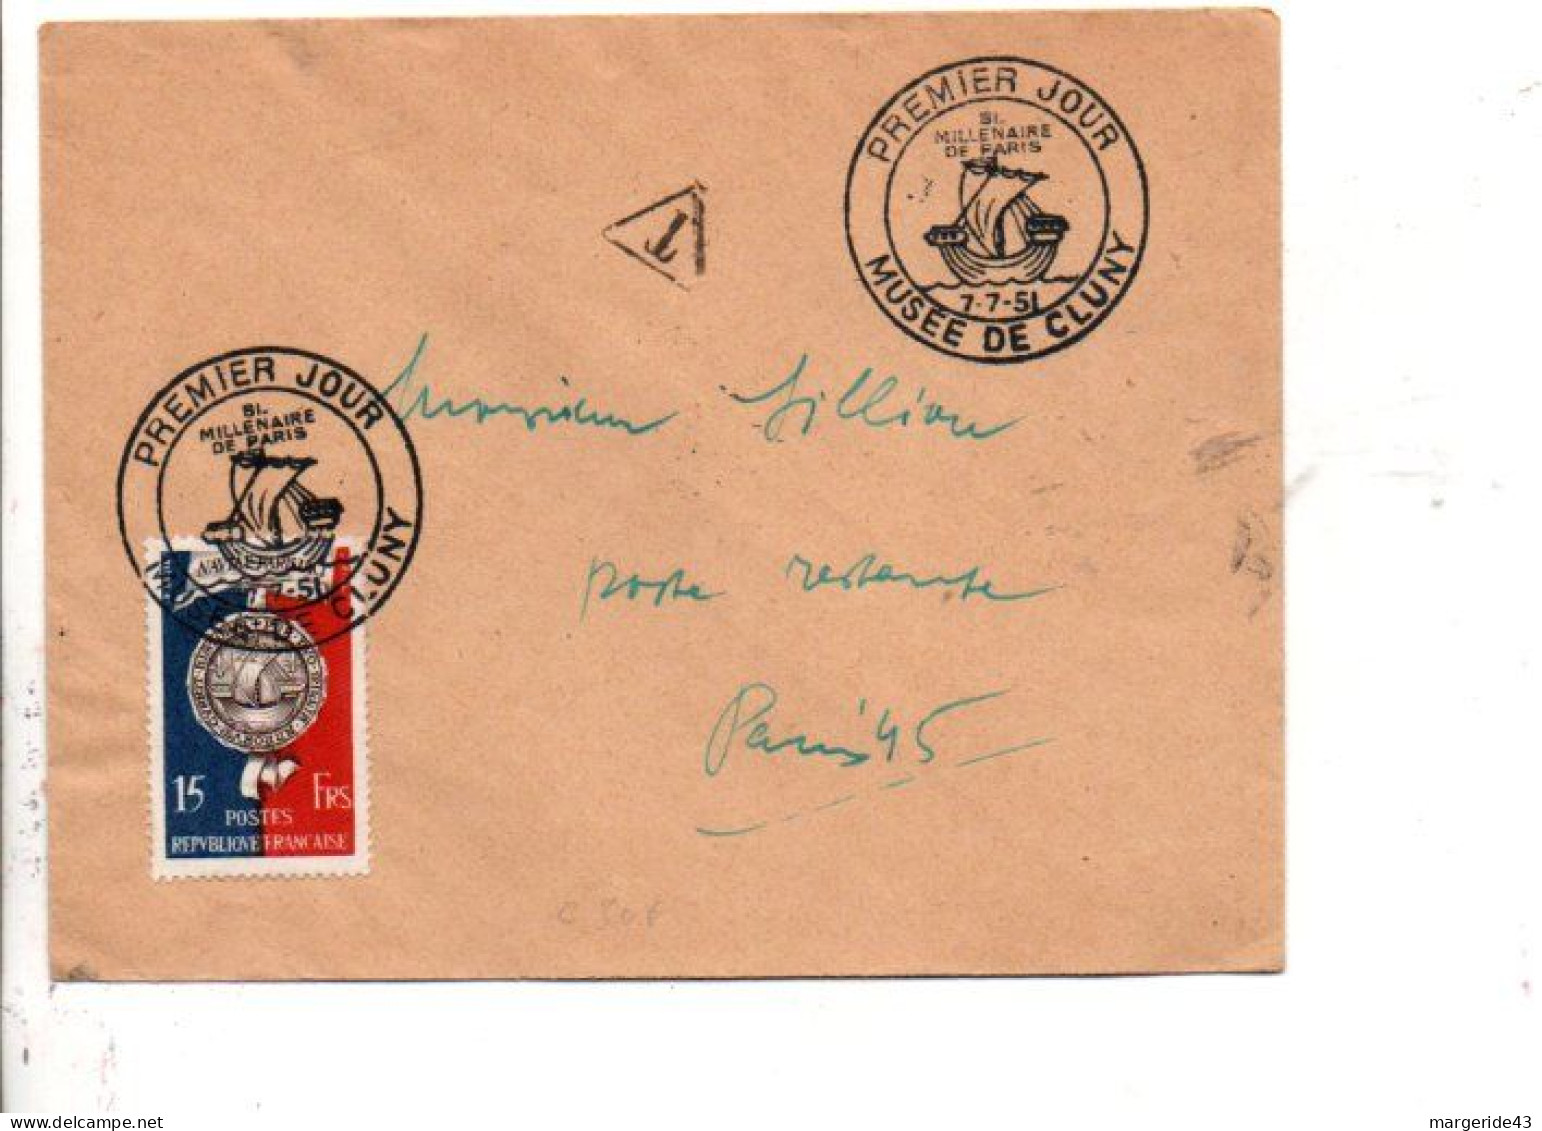 LETTRE FDC MUSEE DE CLUNY 1951 - Commemorative Postmarks